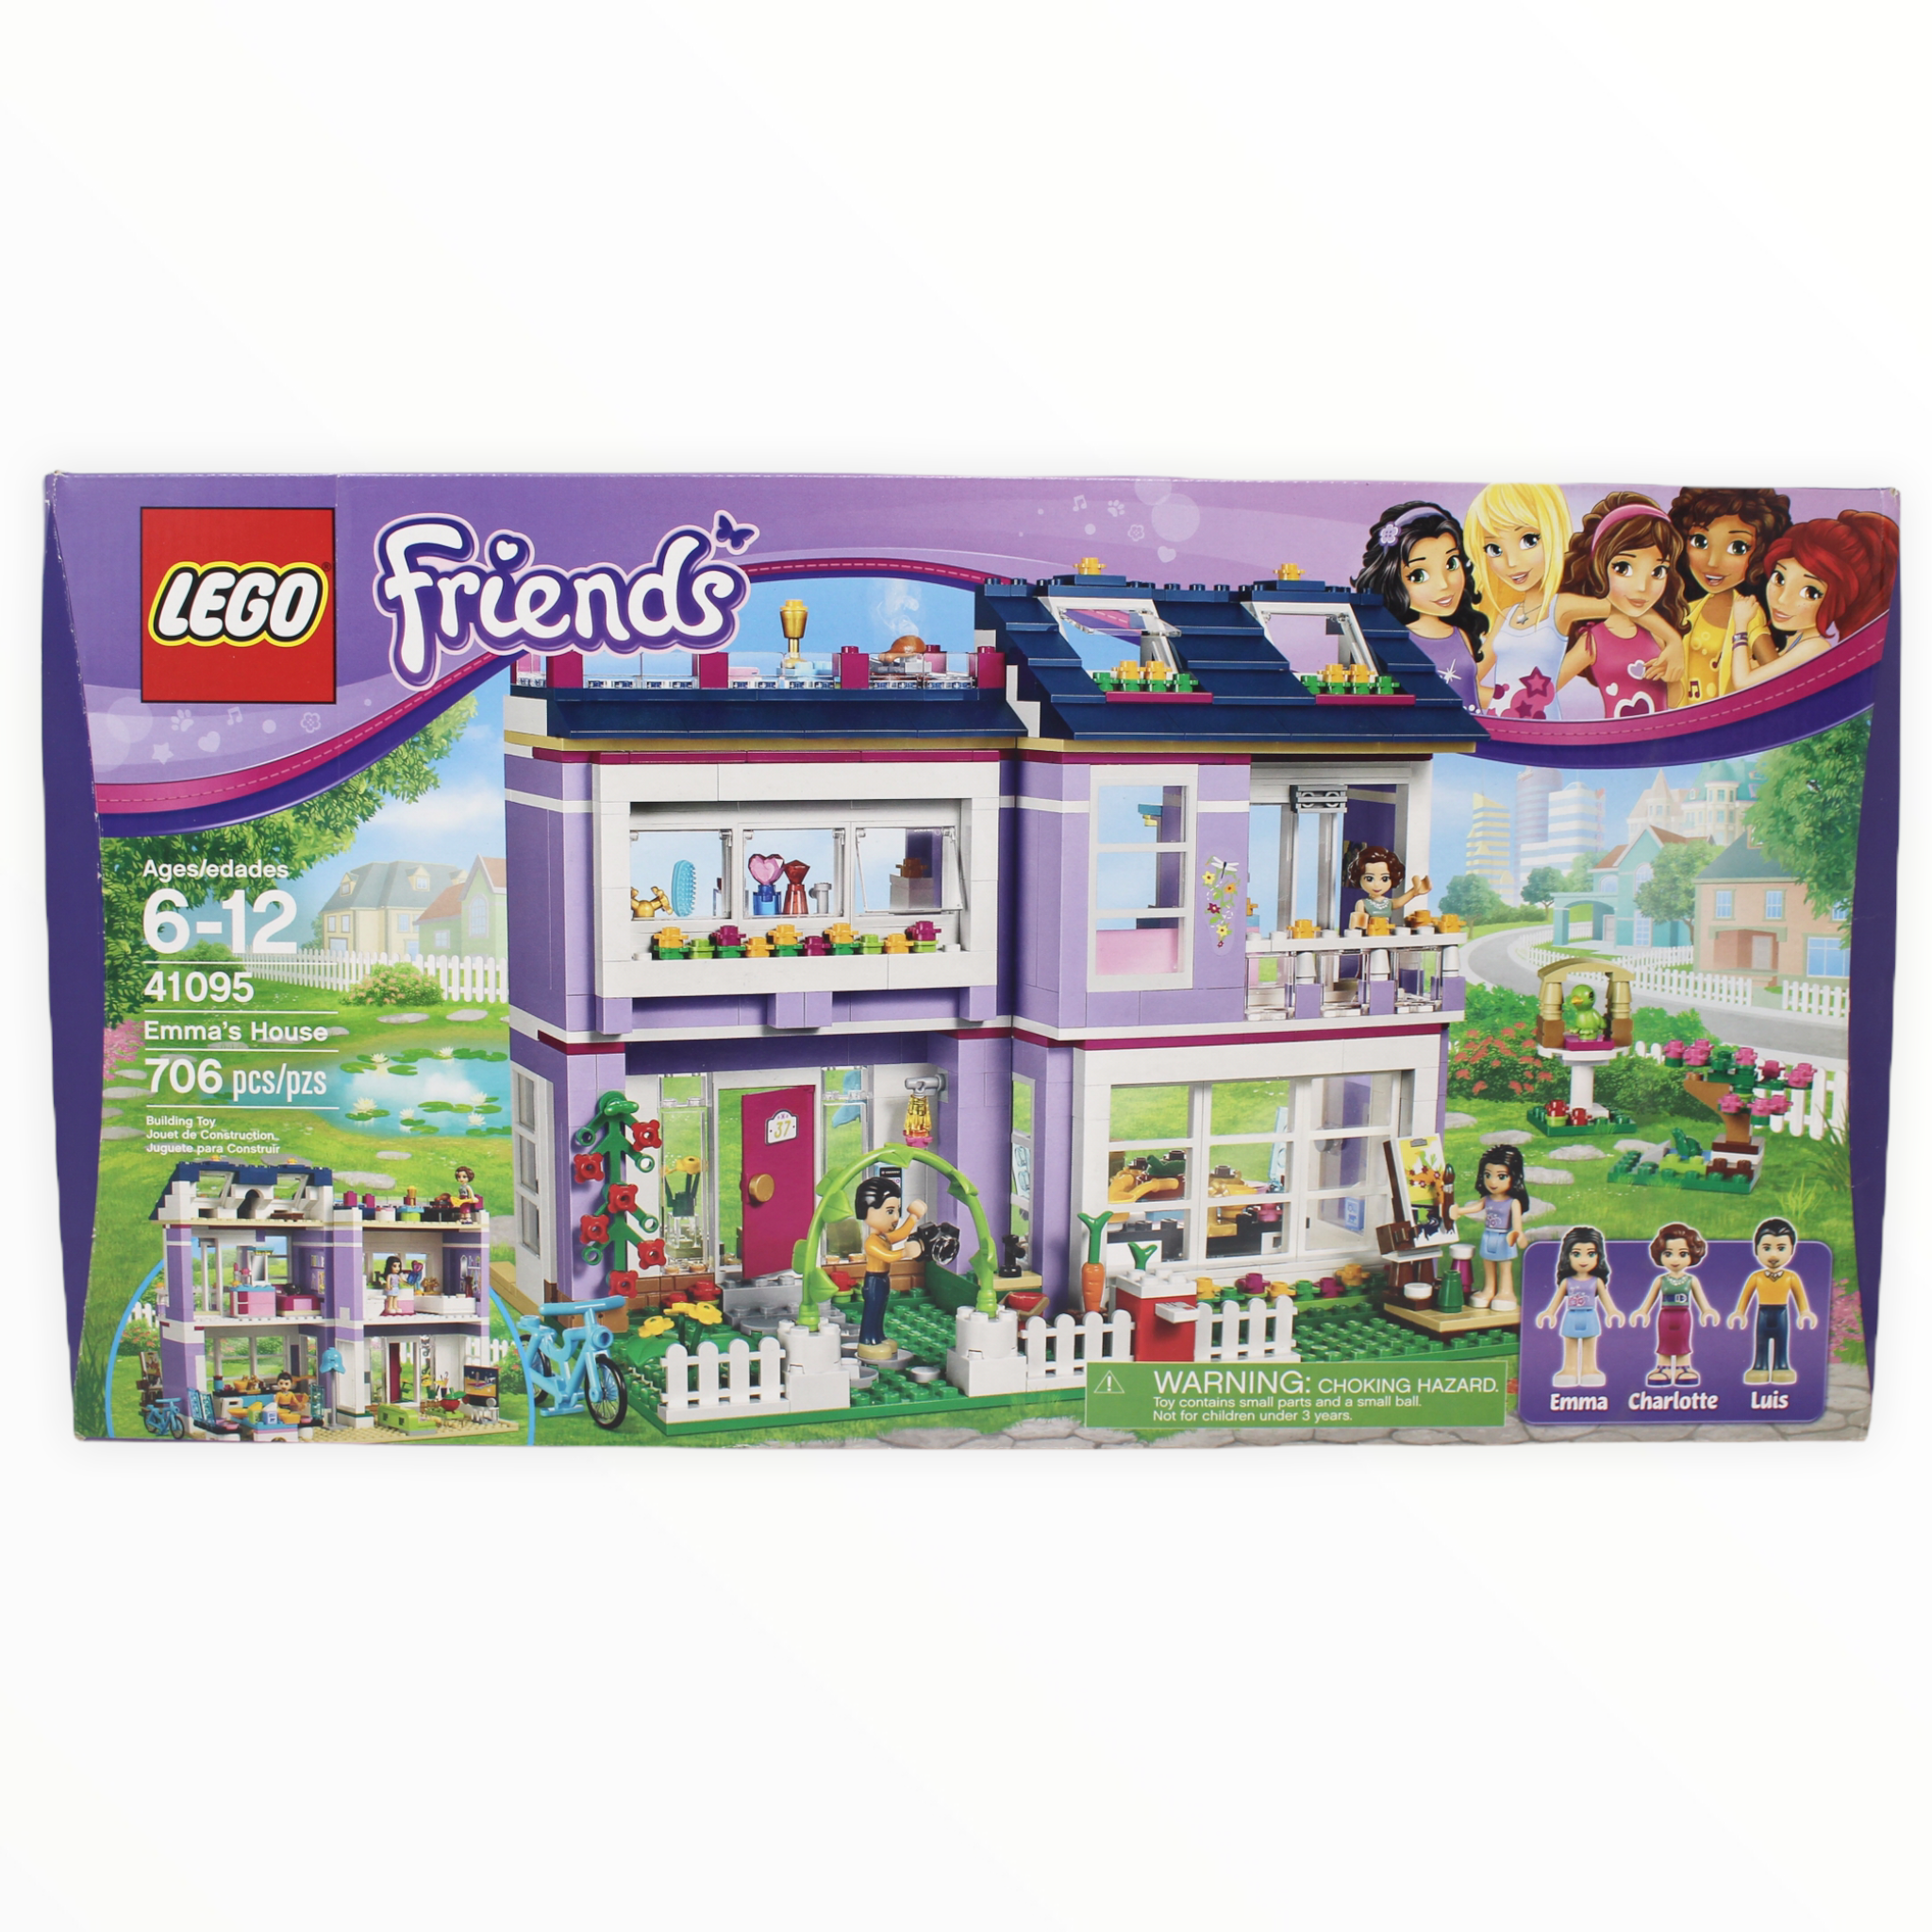 Certified Used Set 41095 Friends Emma’s House